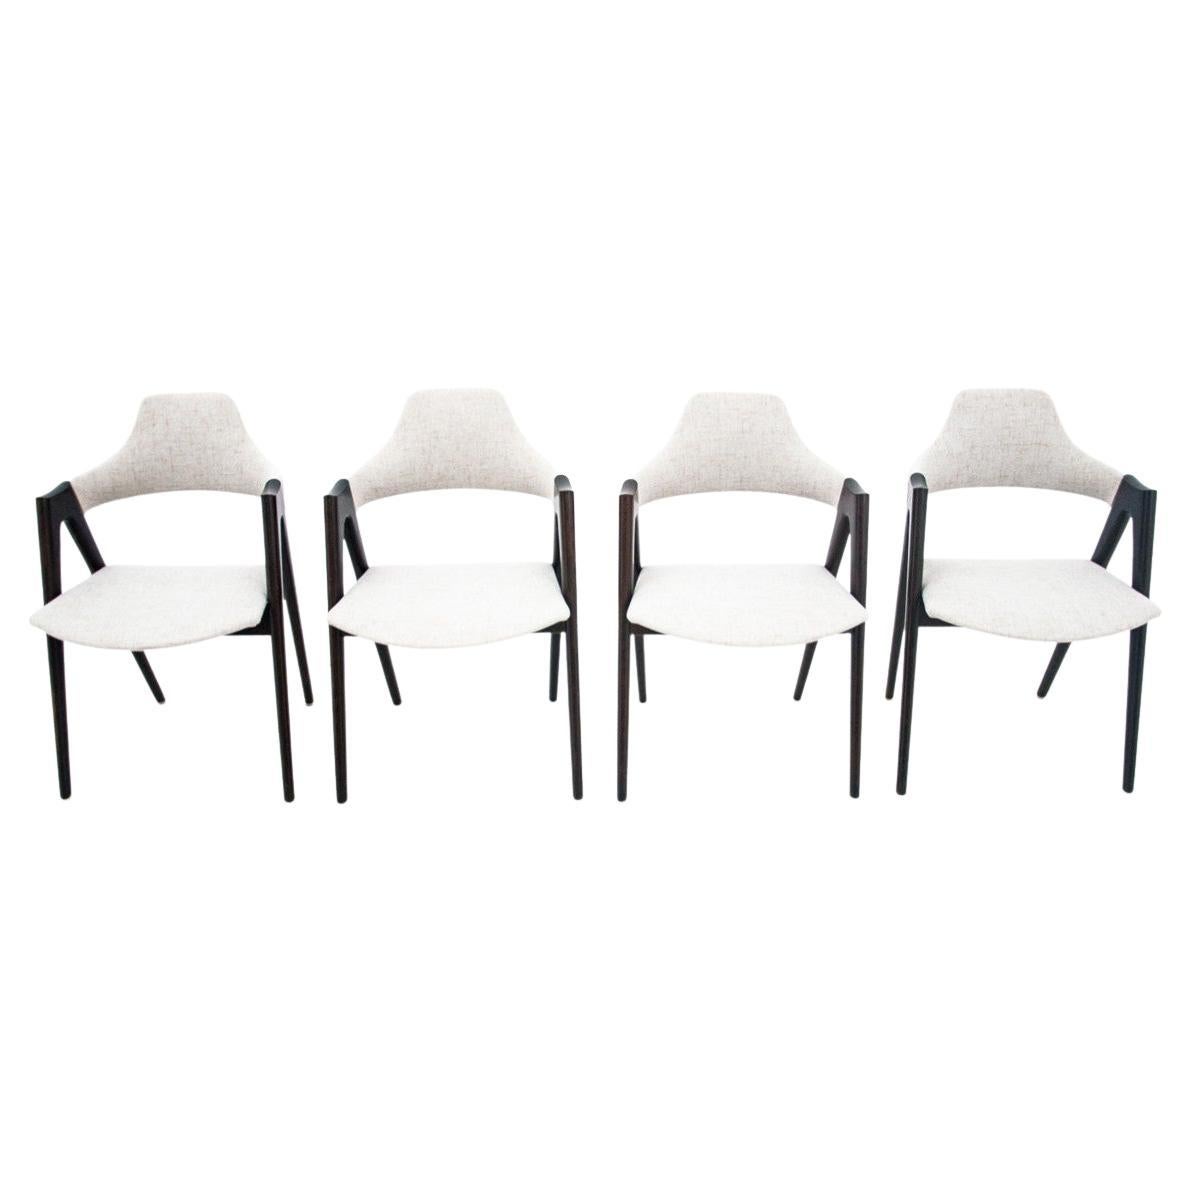 Four Compass Dining Room Chairs, Designed by Kai Kristiansen, Denmark, 1960s